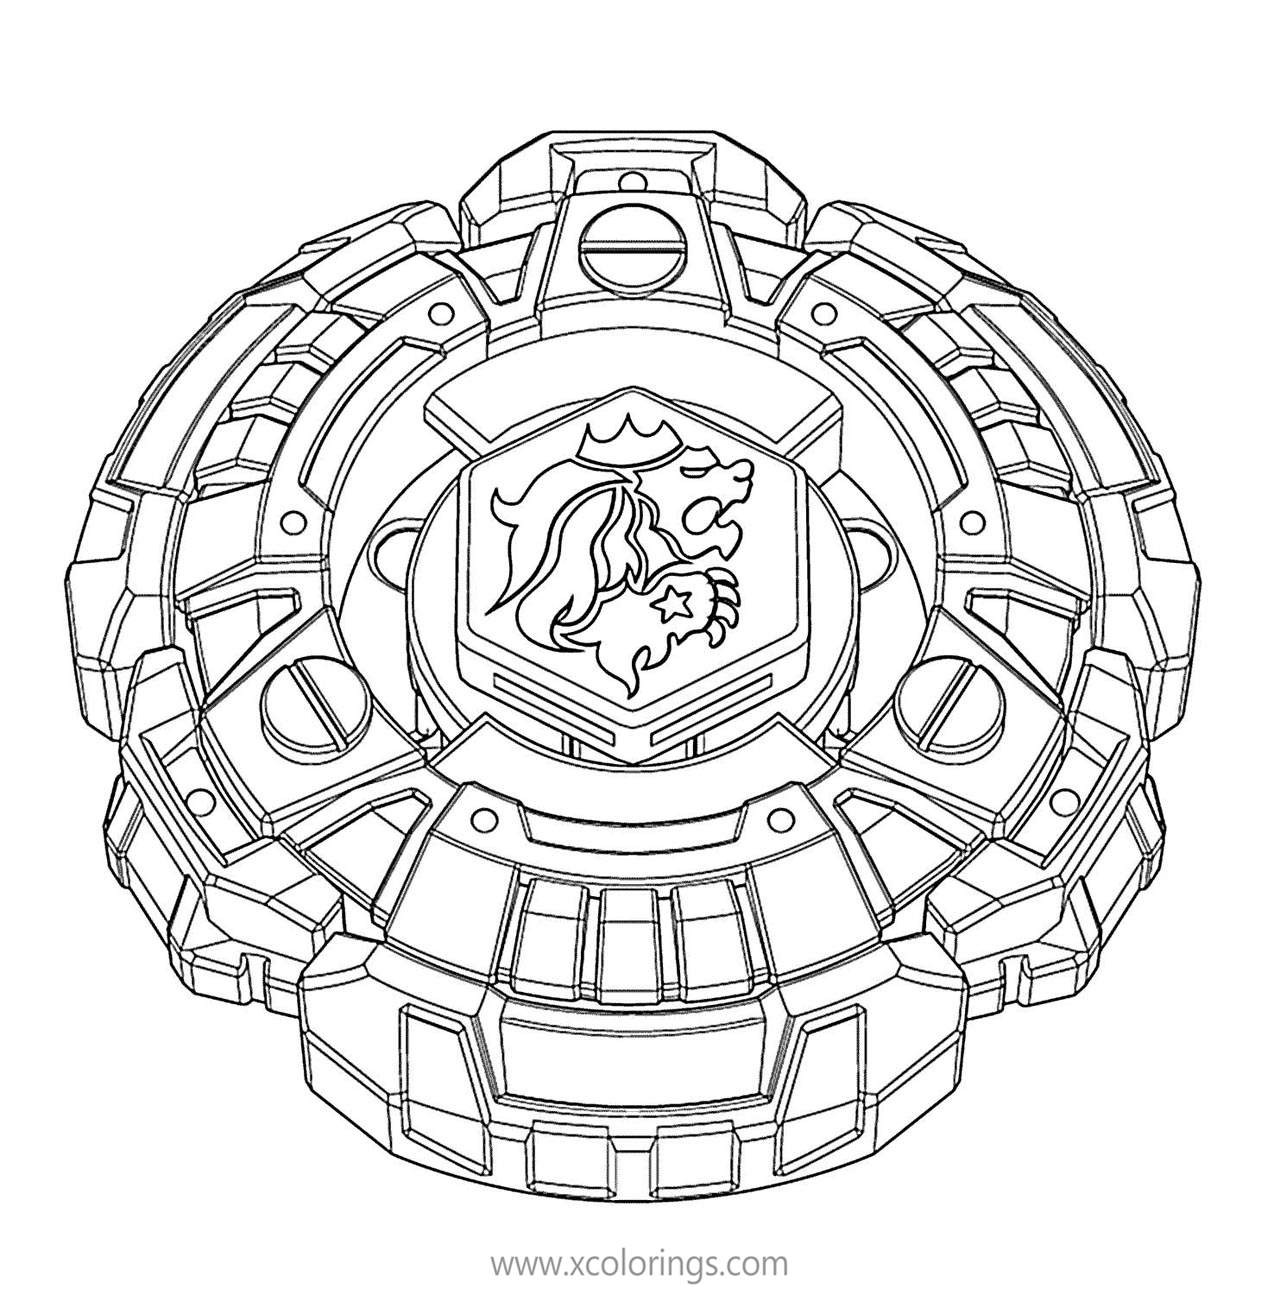 Free Rock Leone Beyblade Coloring Pages printable